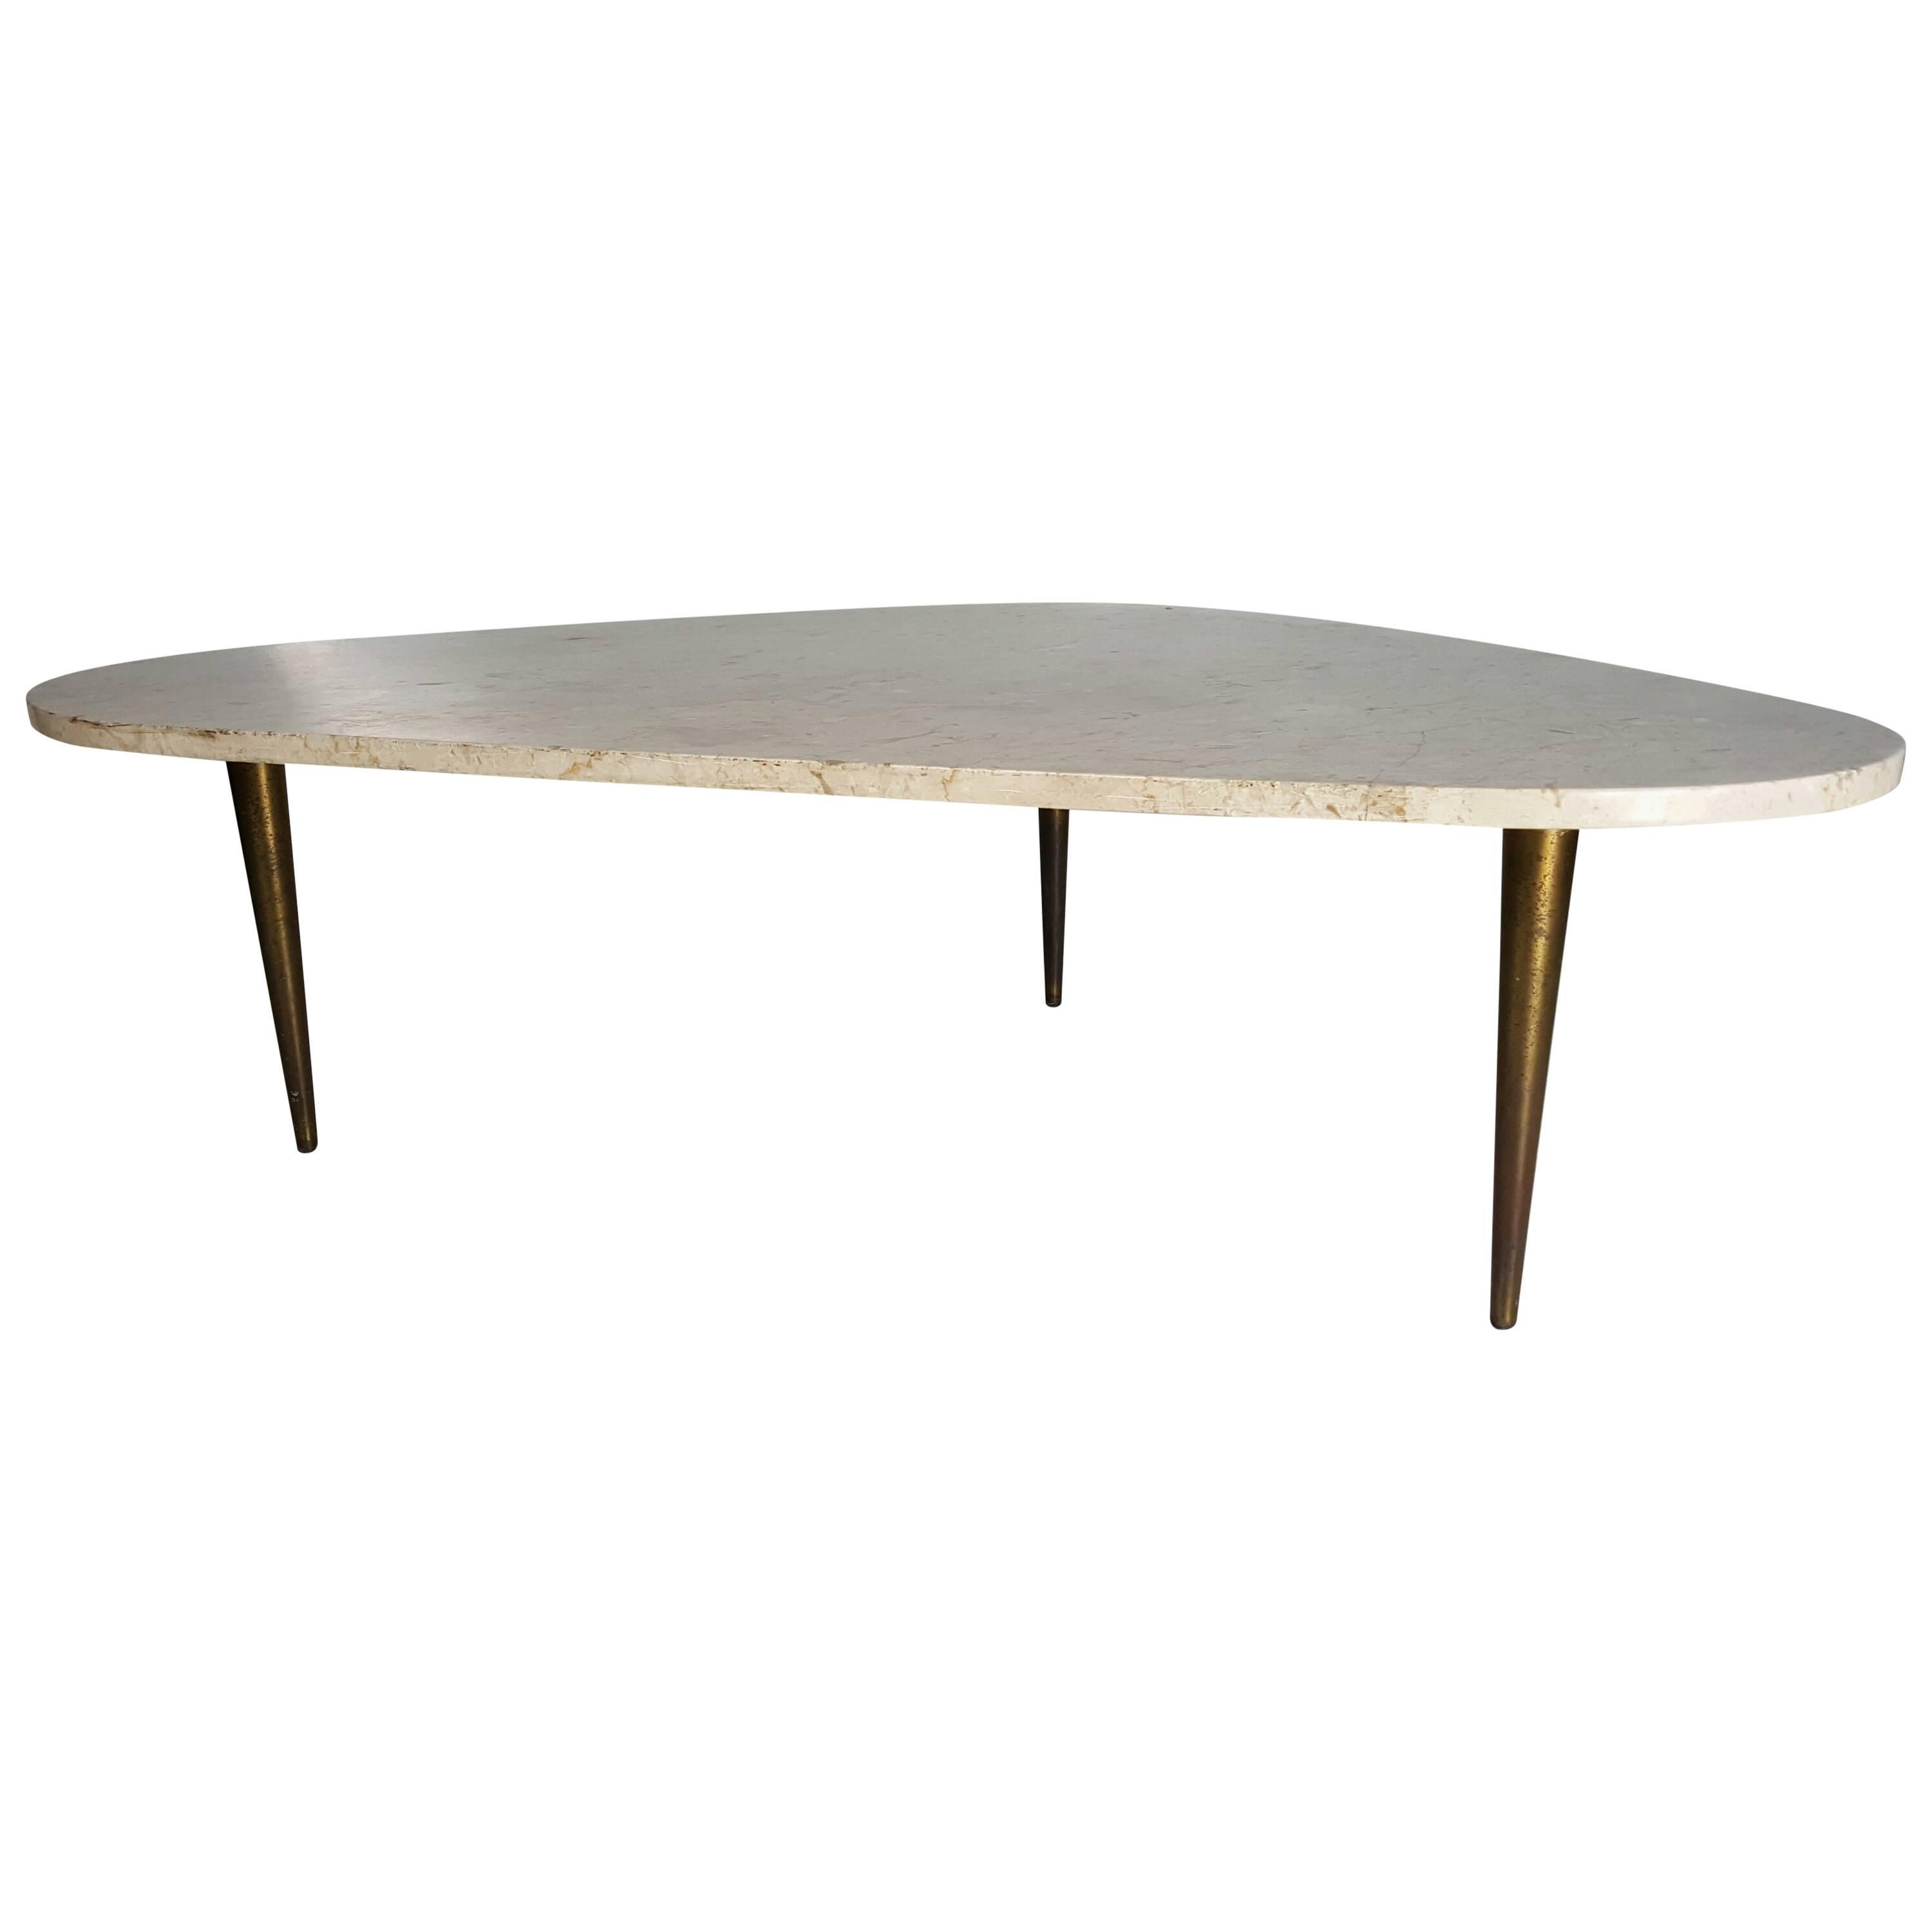 Modernist Marble and Brass Amorphic Cocktail Table, Weiman